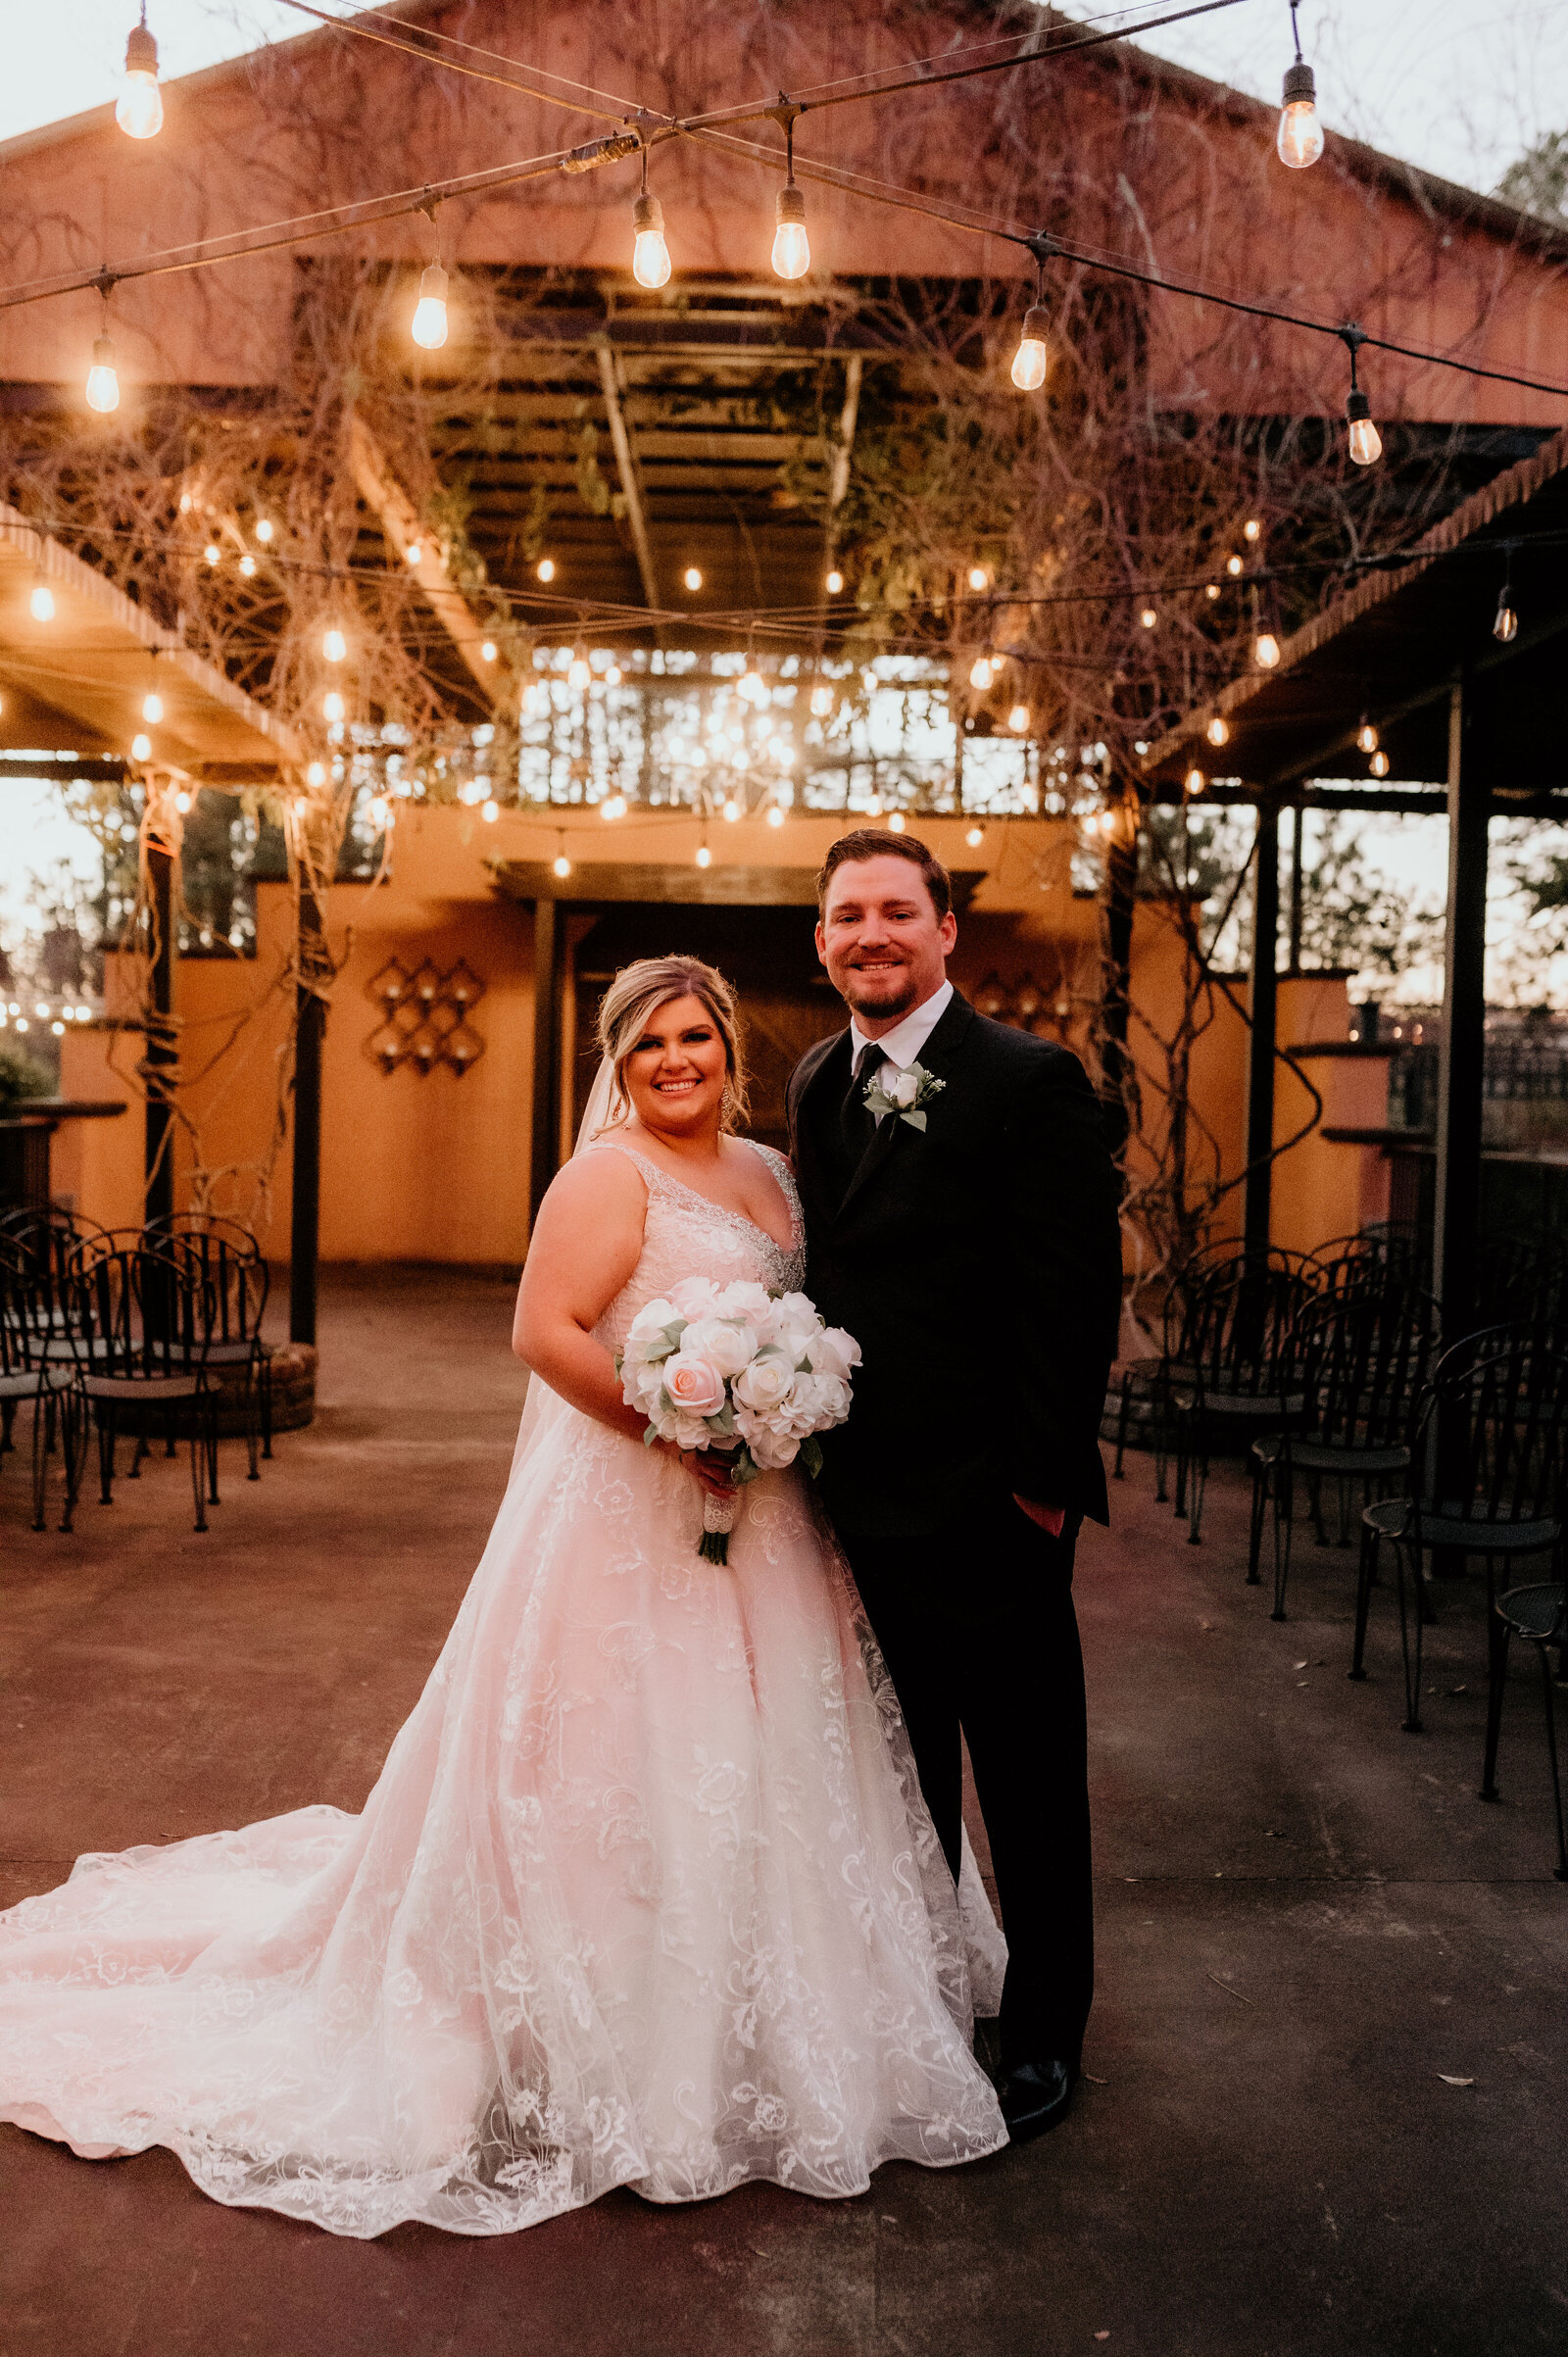 outdoor wedding reception with bride and groom standing under edison bulb stringed lights and smiling for their little rock wedding reception